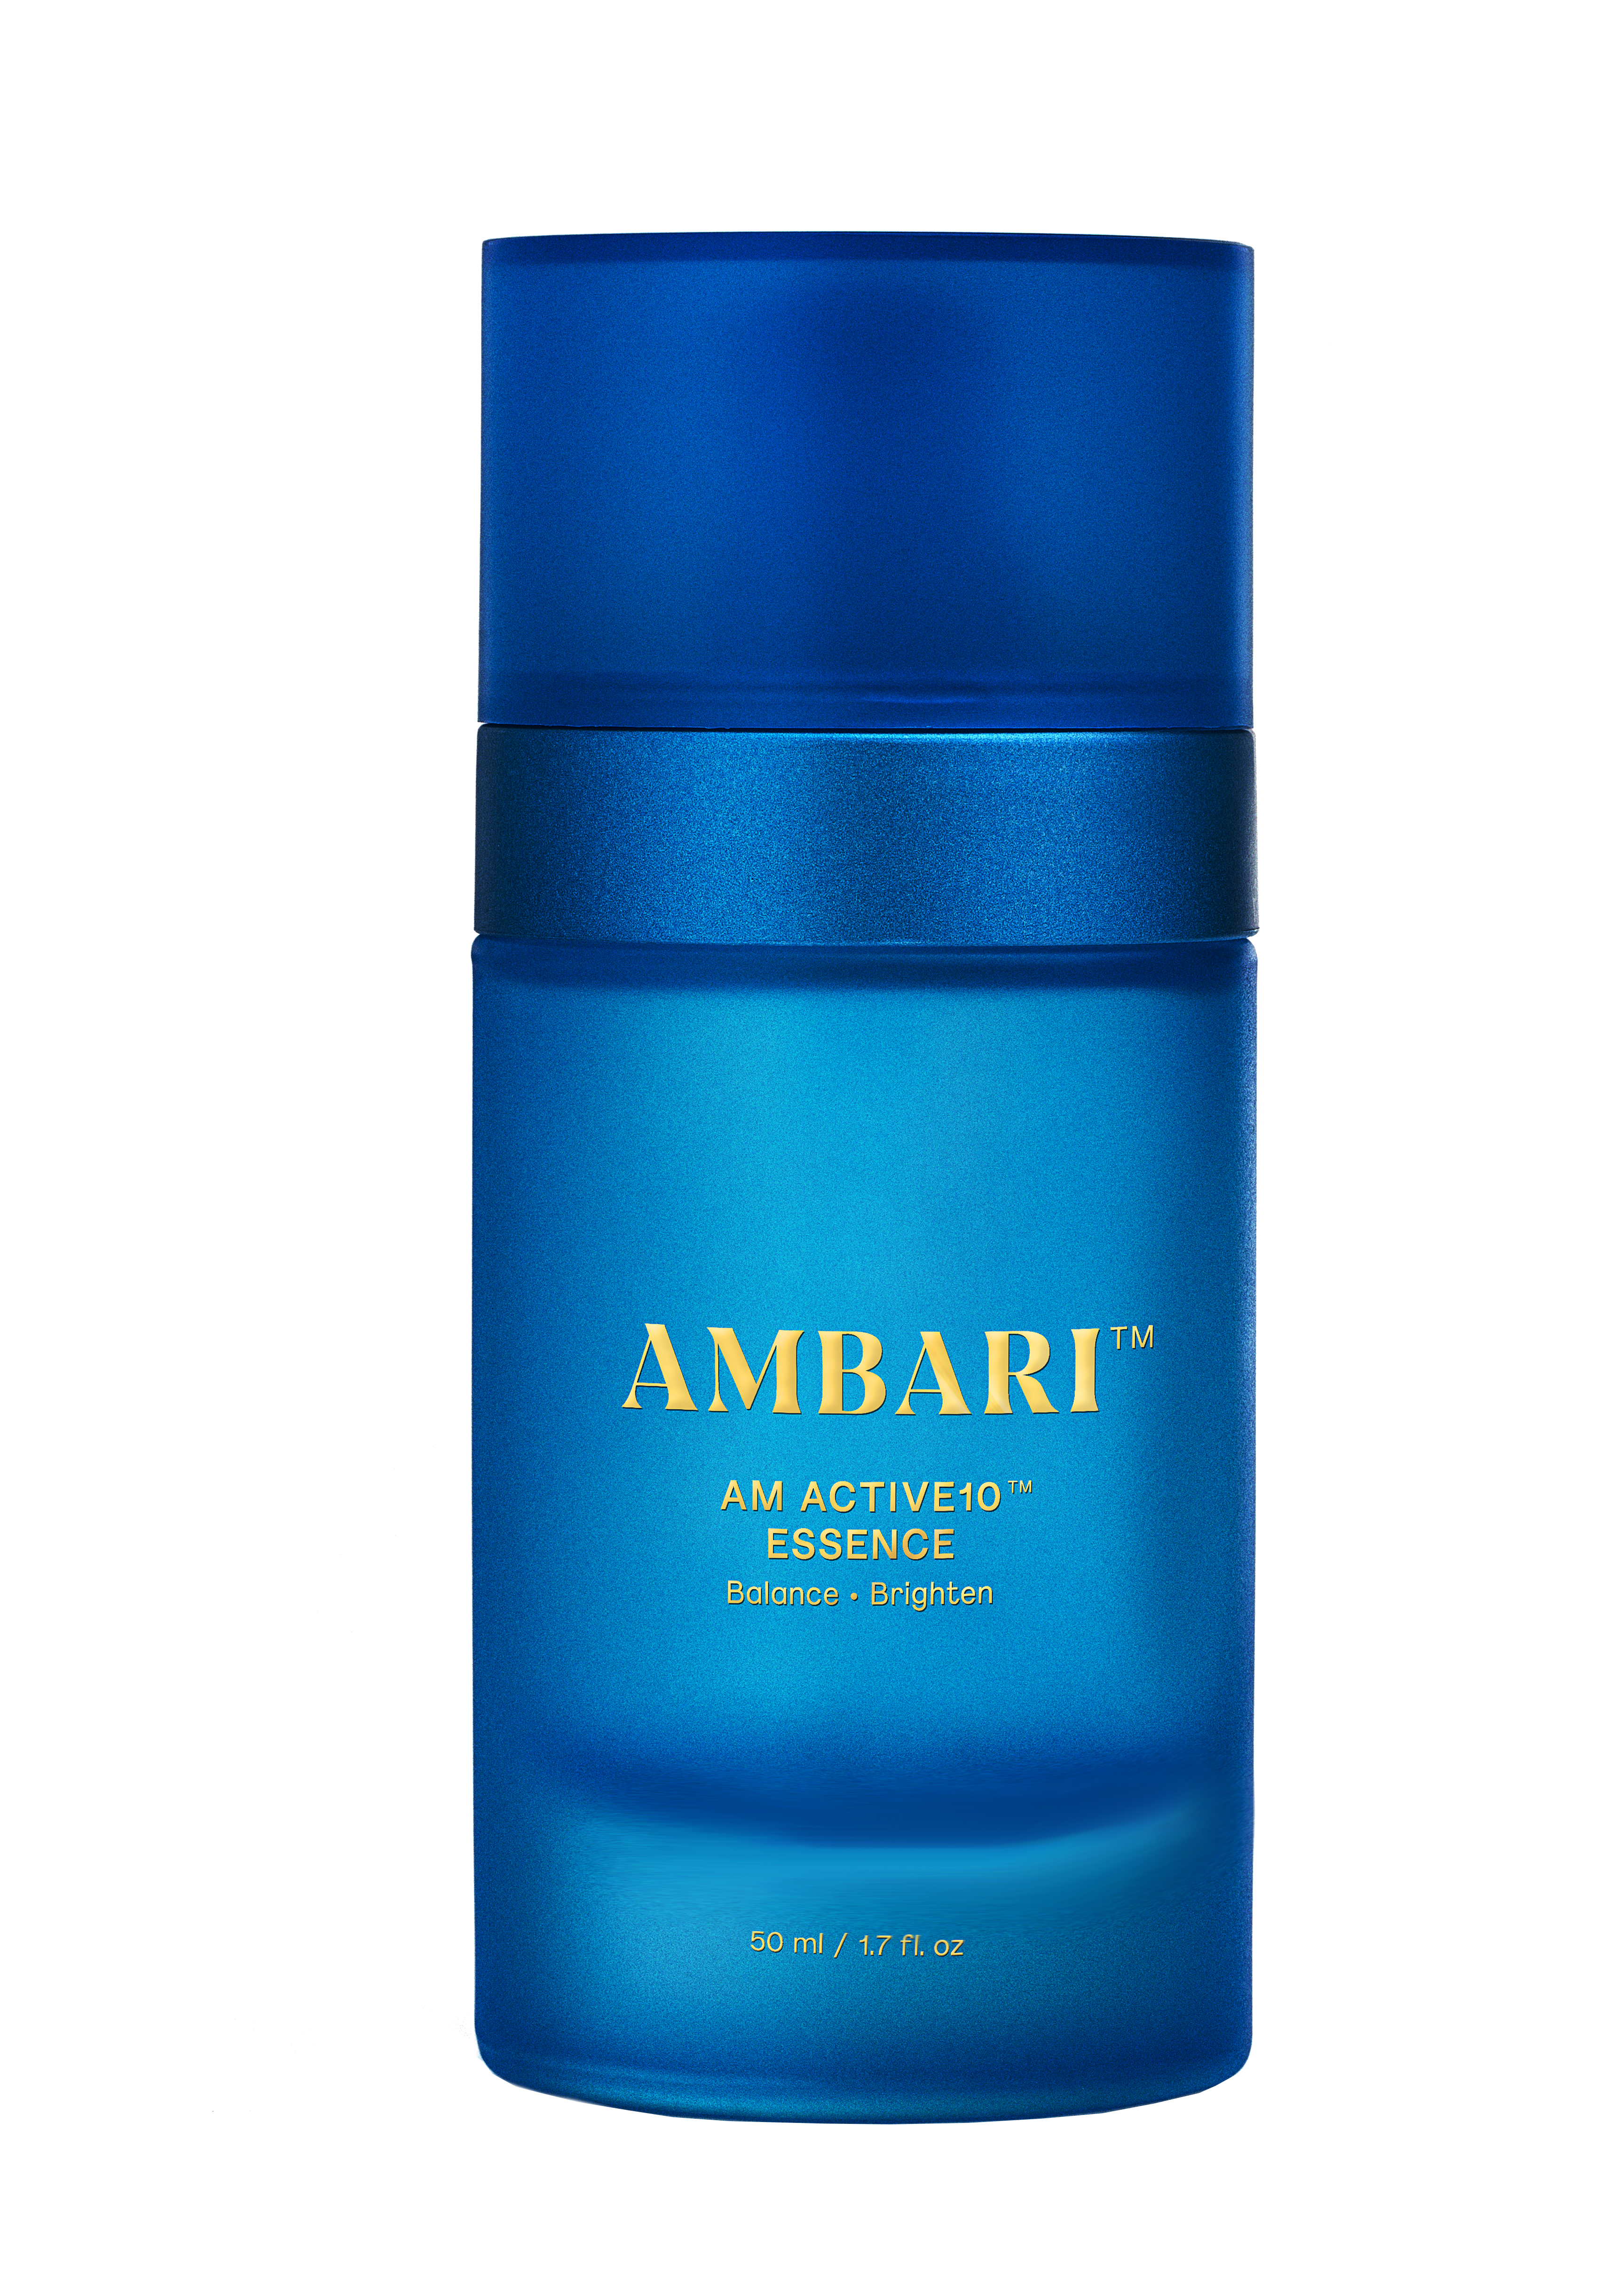 Ambar Perfume 50ml Essential Humidifier Water-soluble Essence Special for  Humidifier with Technology Melting Sandalwood Essence Get a Purest and  Intense Aroma Premium Quality Stained Flavors - AliExpress